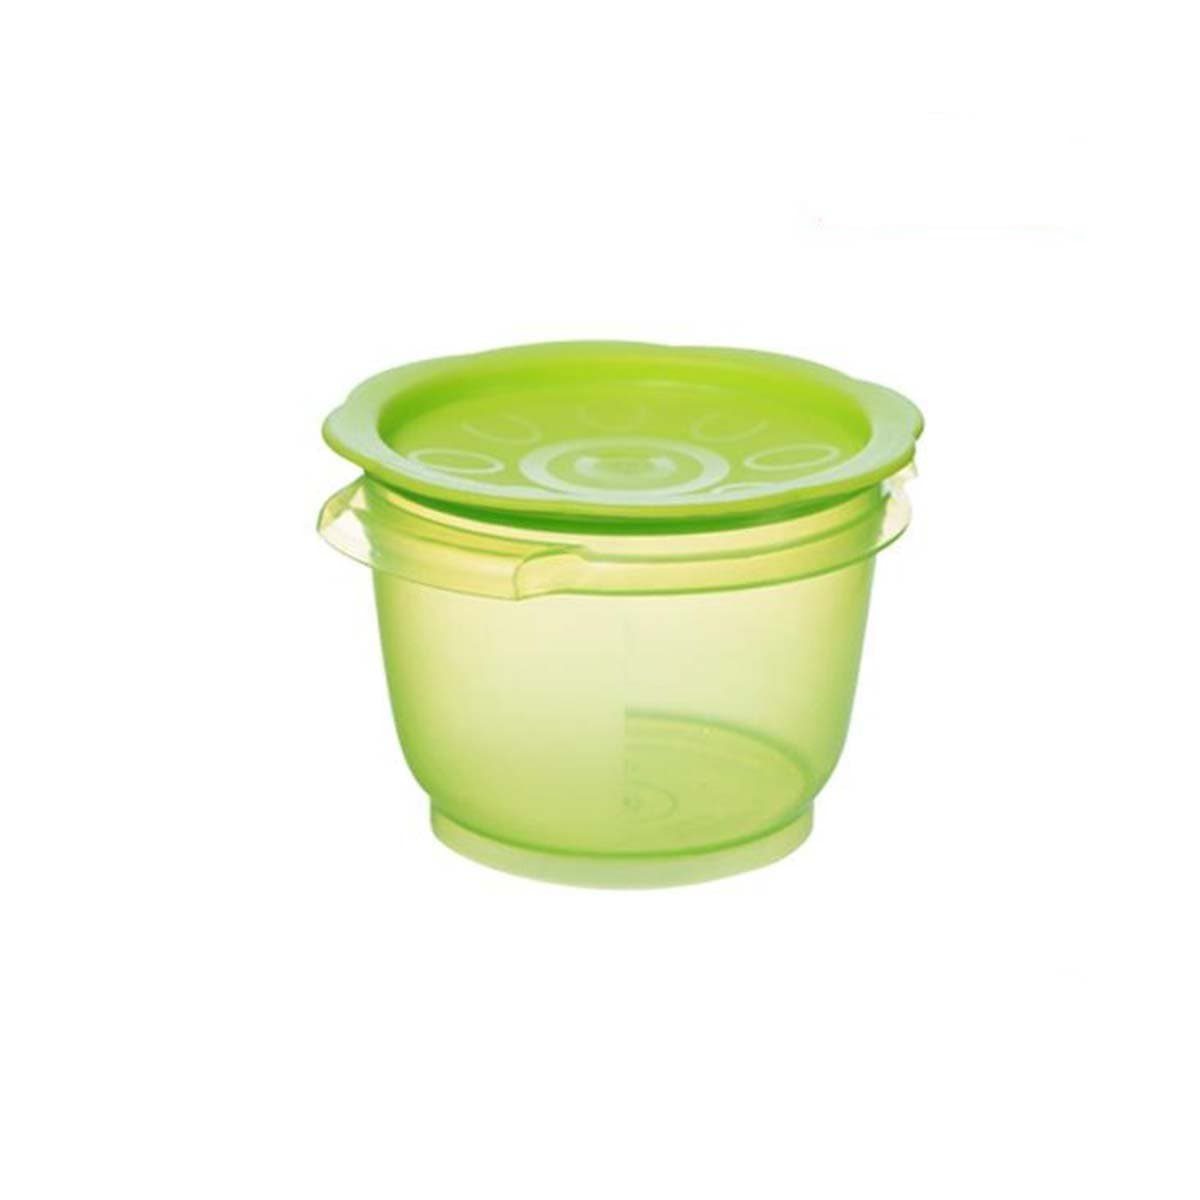 0501 Food Container Floral w/Cover 0.7L